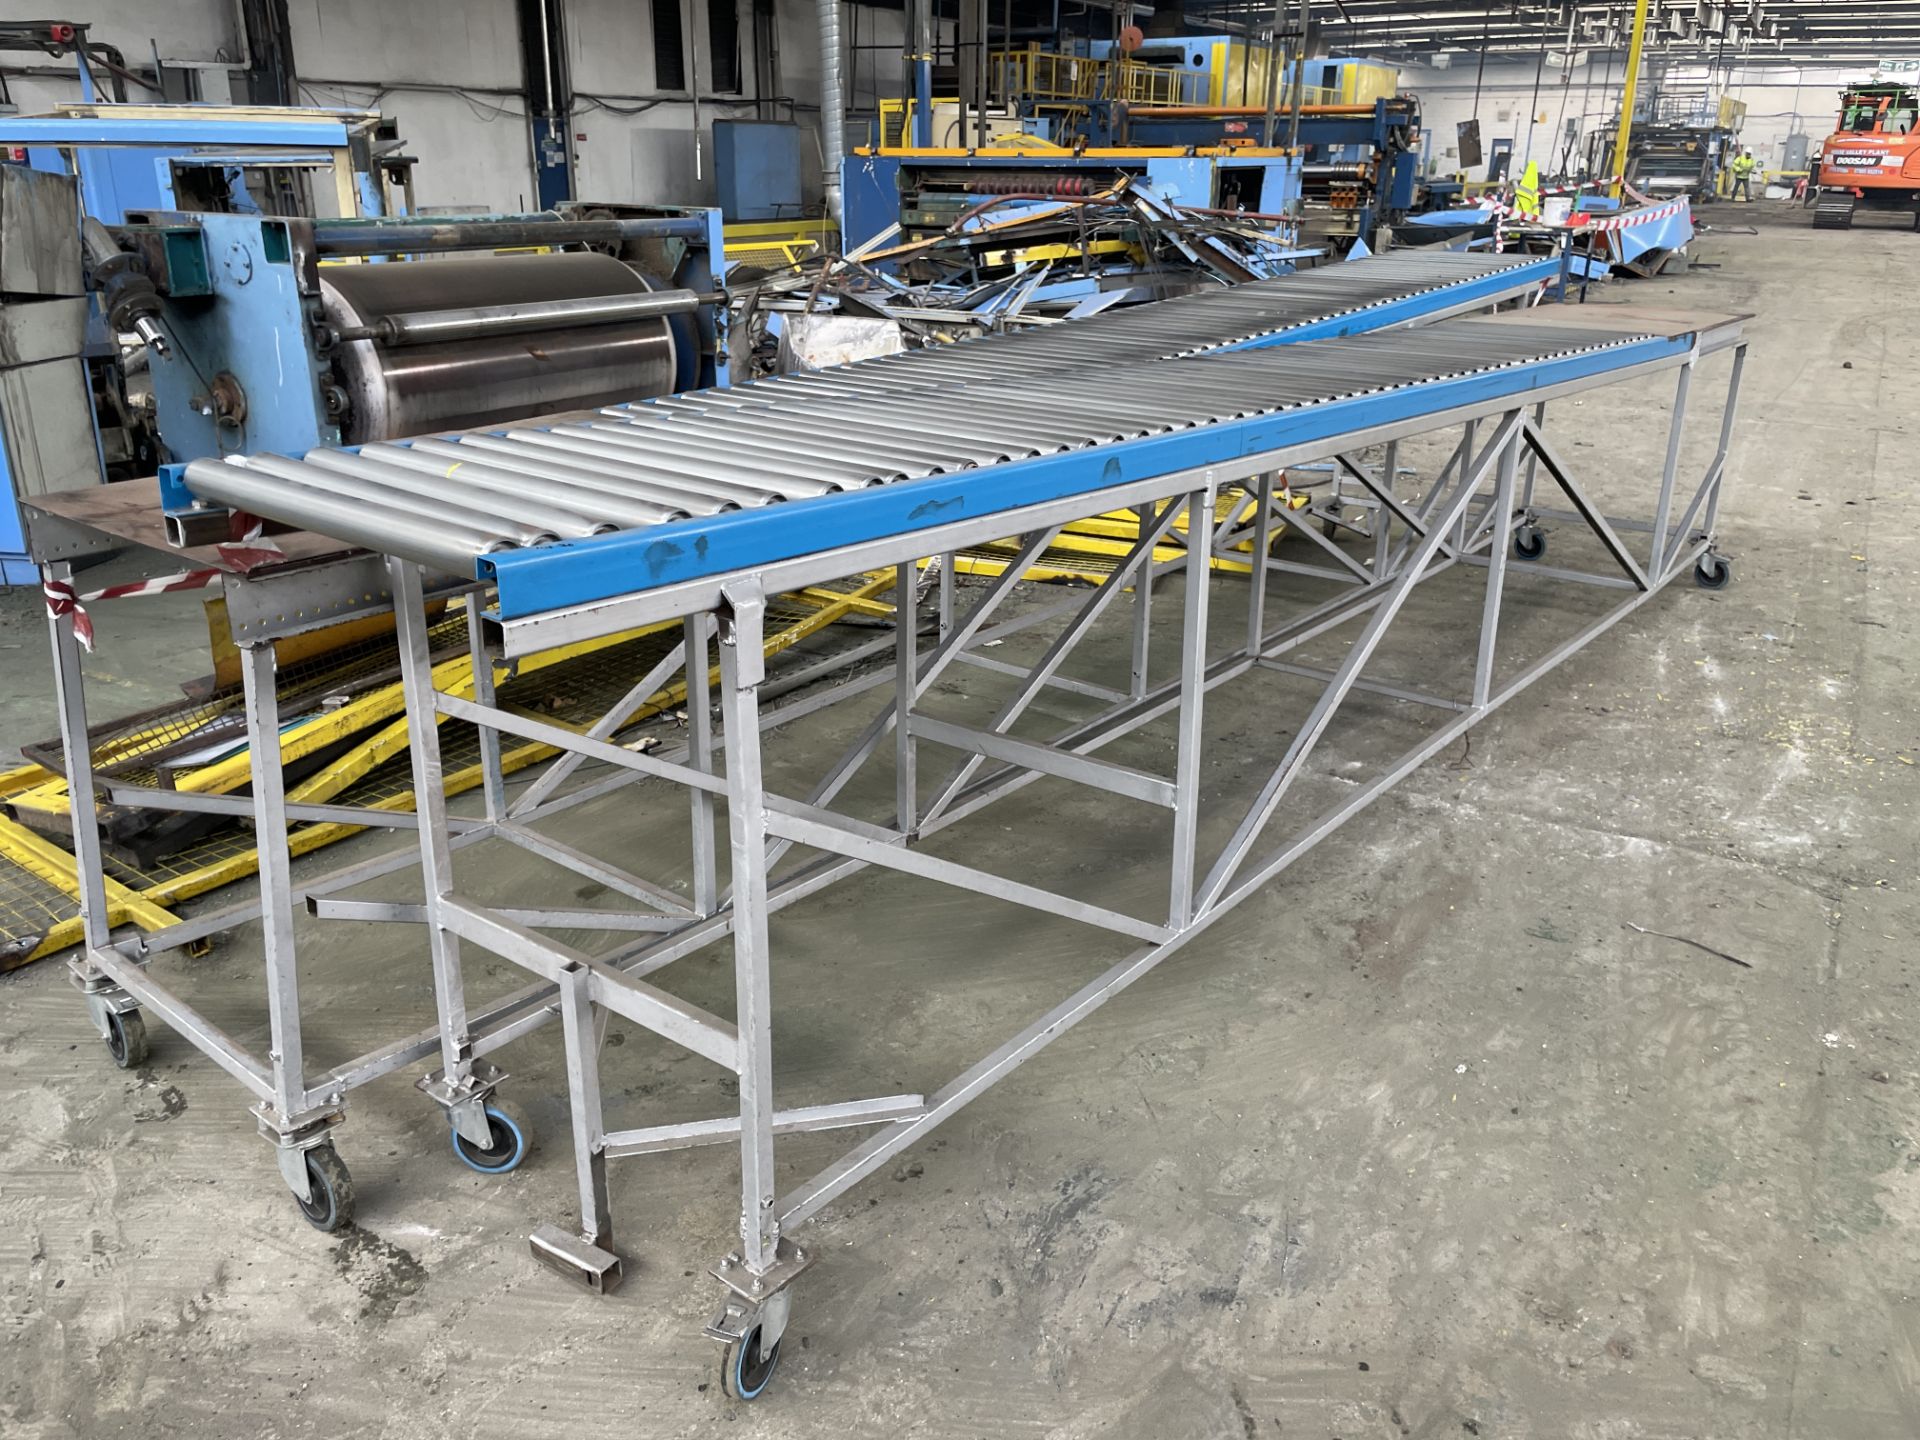 Mobile Gravity Roller Conveyor Table, approx. 6.5m long x 600mm wide on rolls (Contractors take